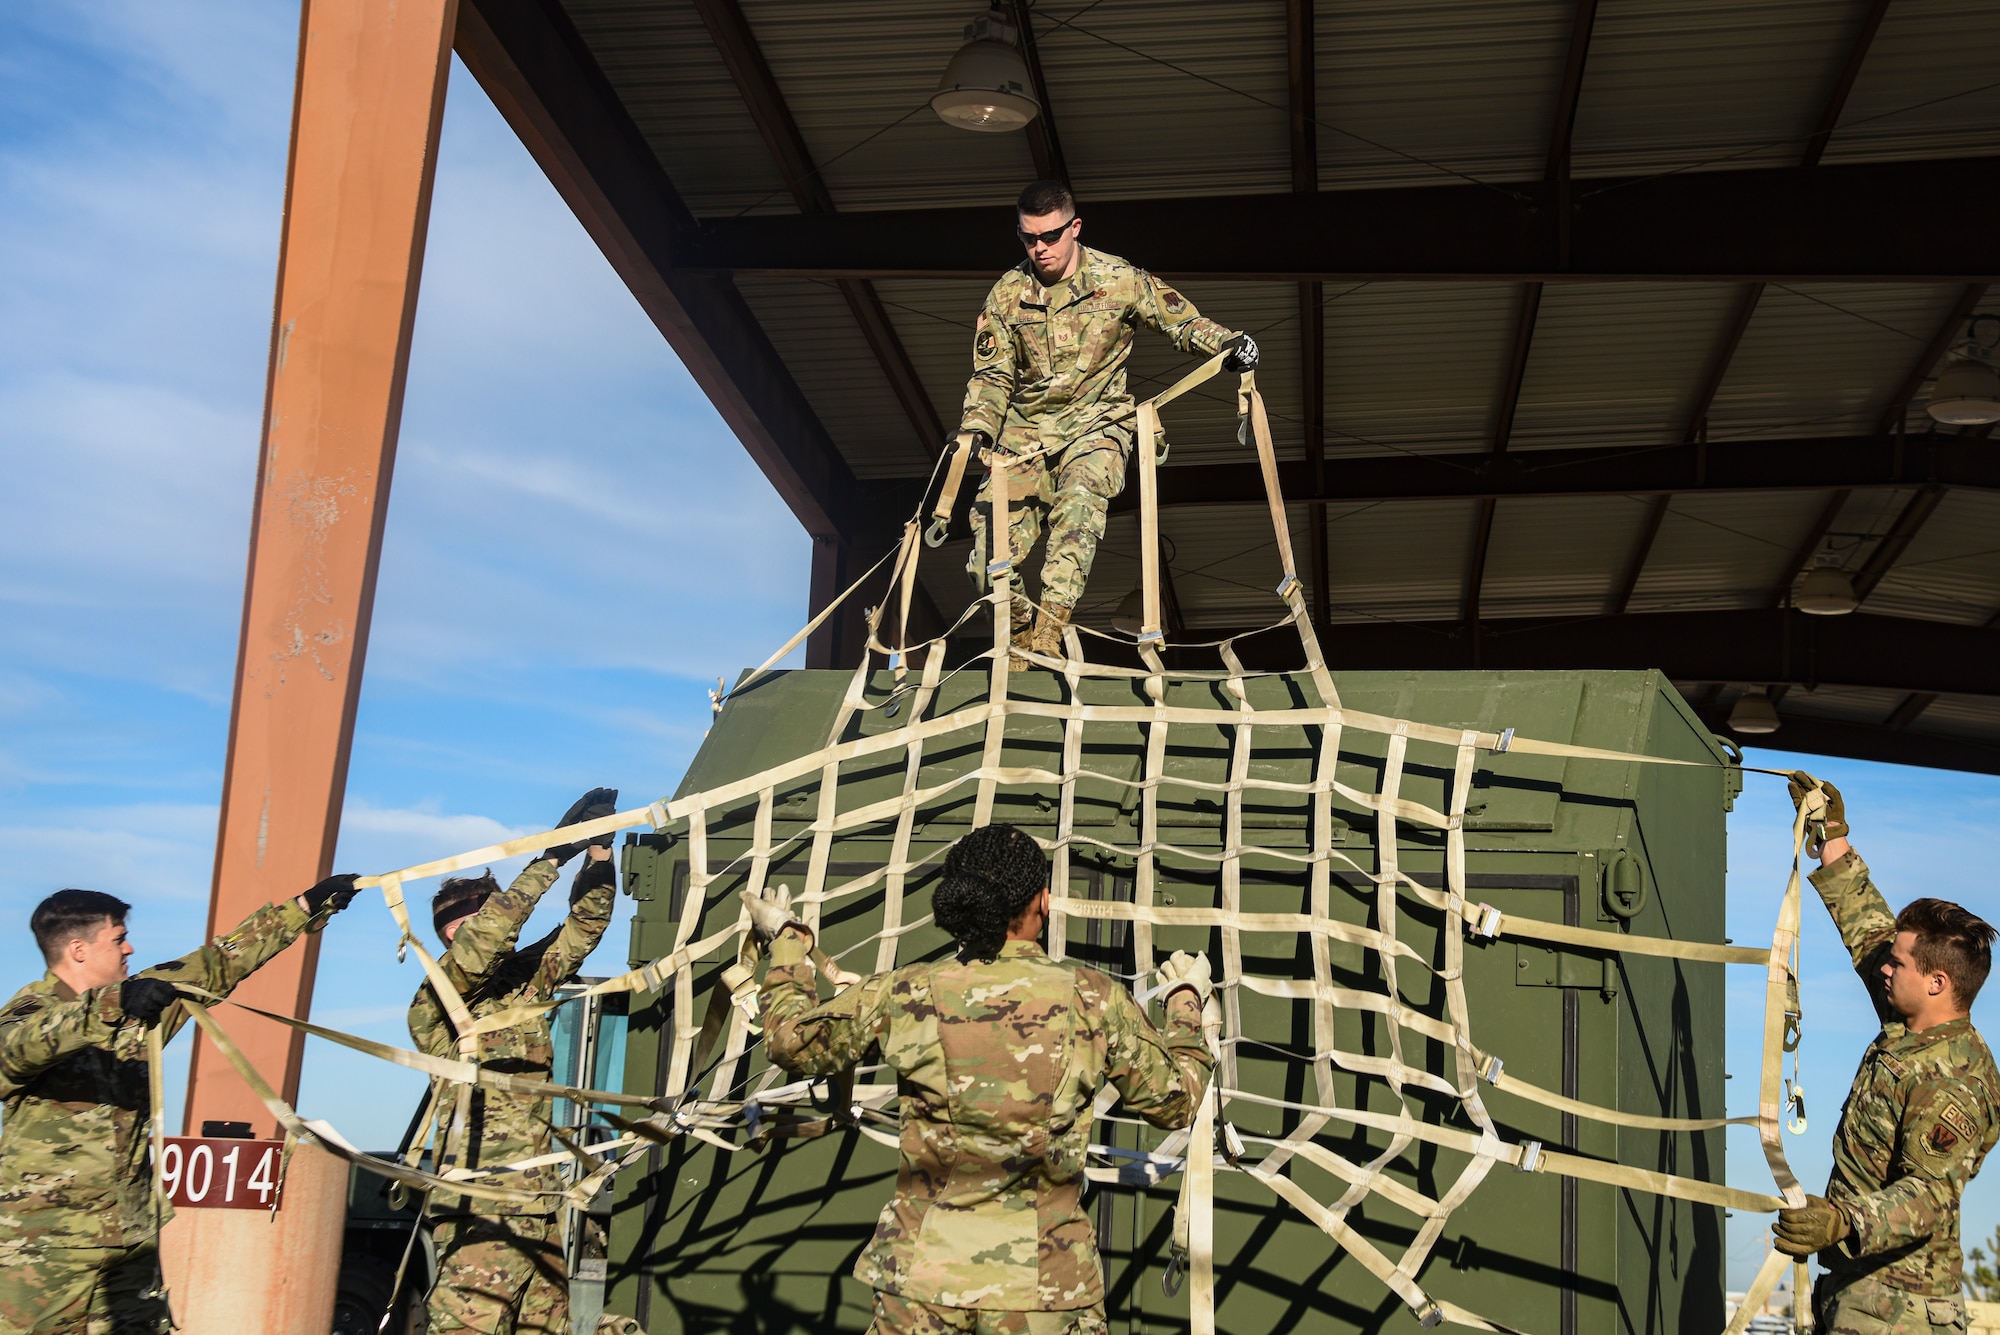 Pictured above is a group of Airmen handing a cargo net to an Airmen standing on a container.